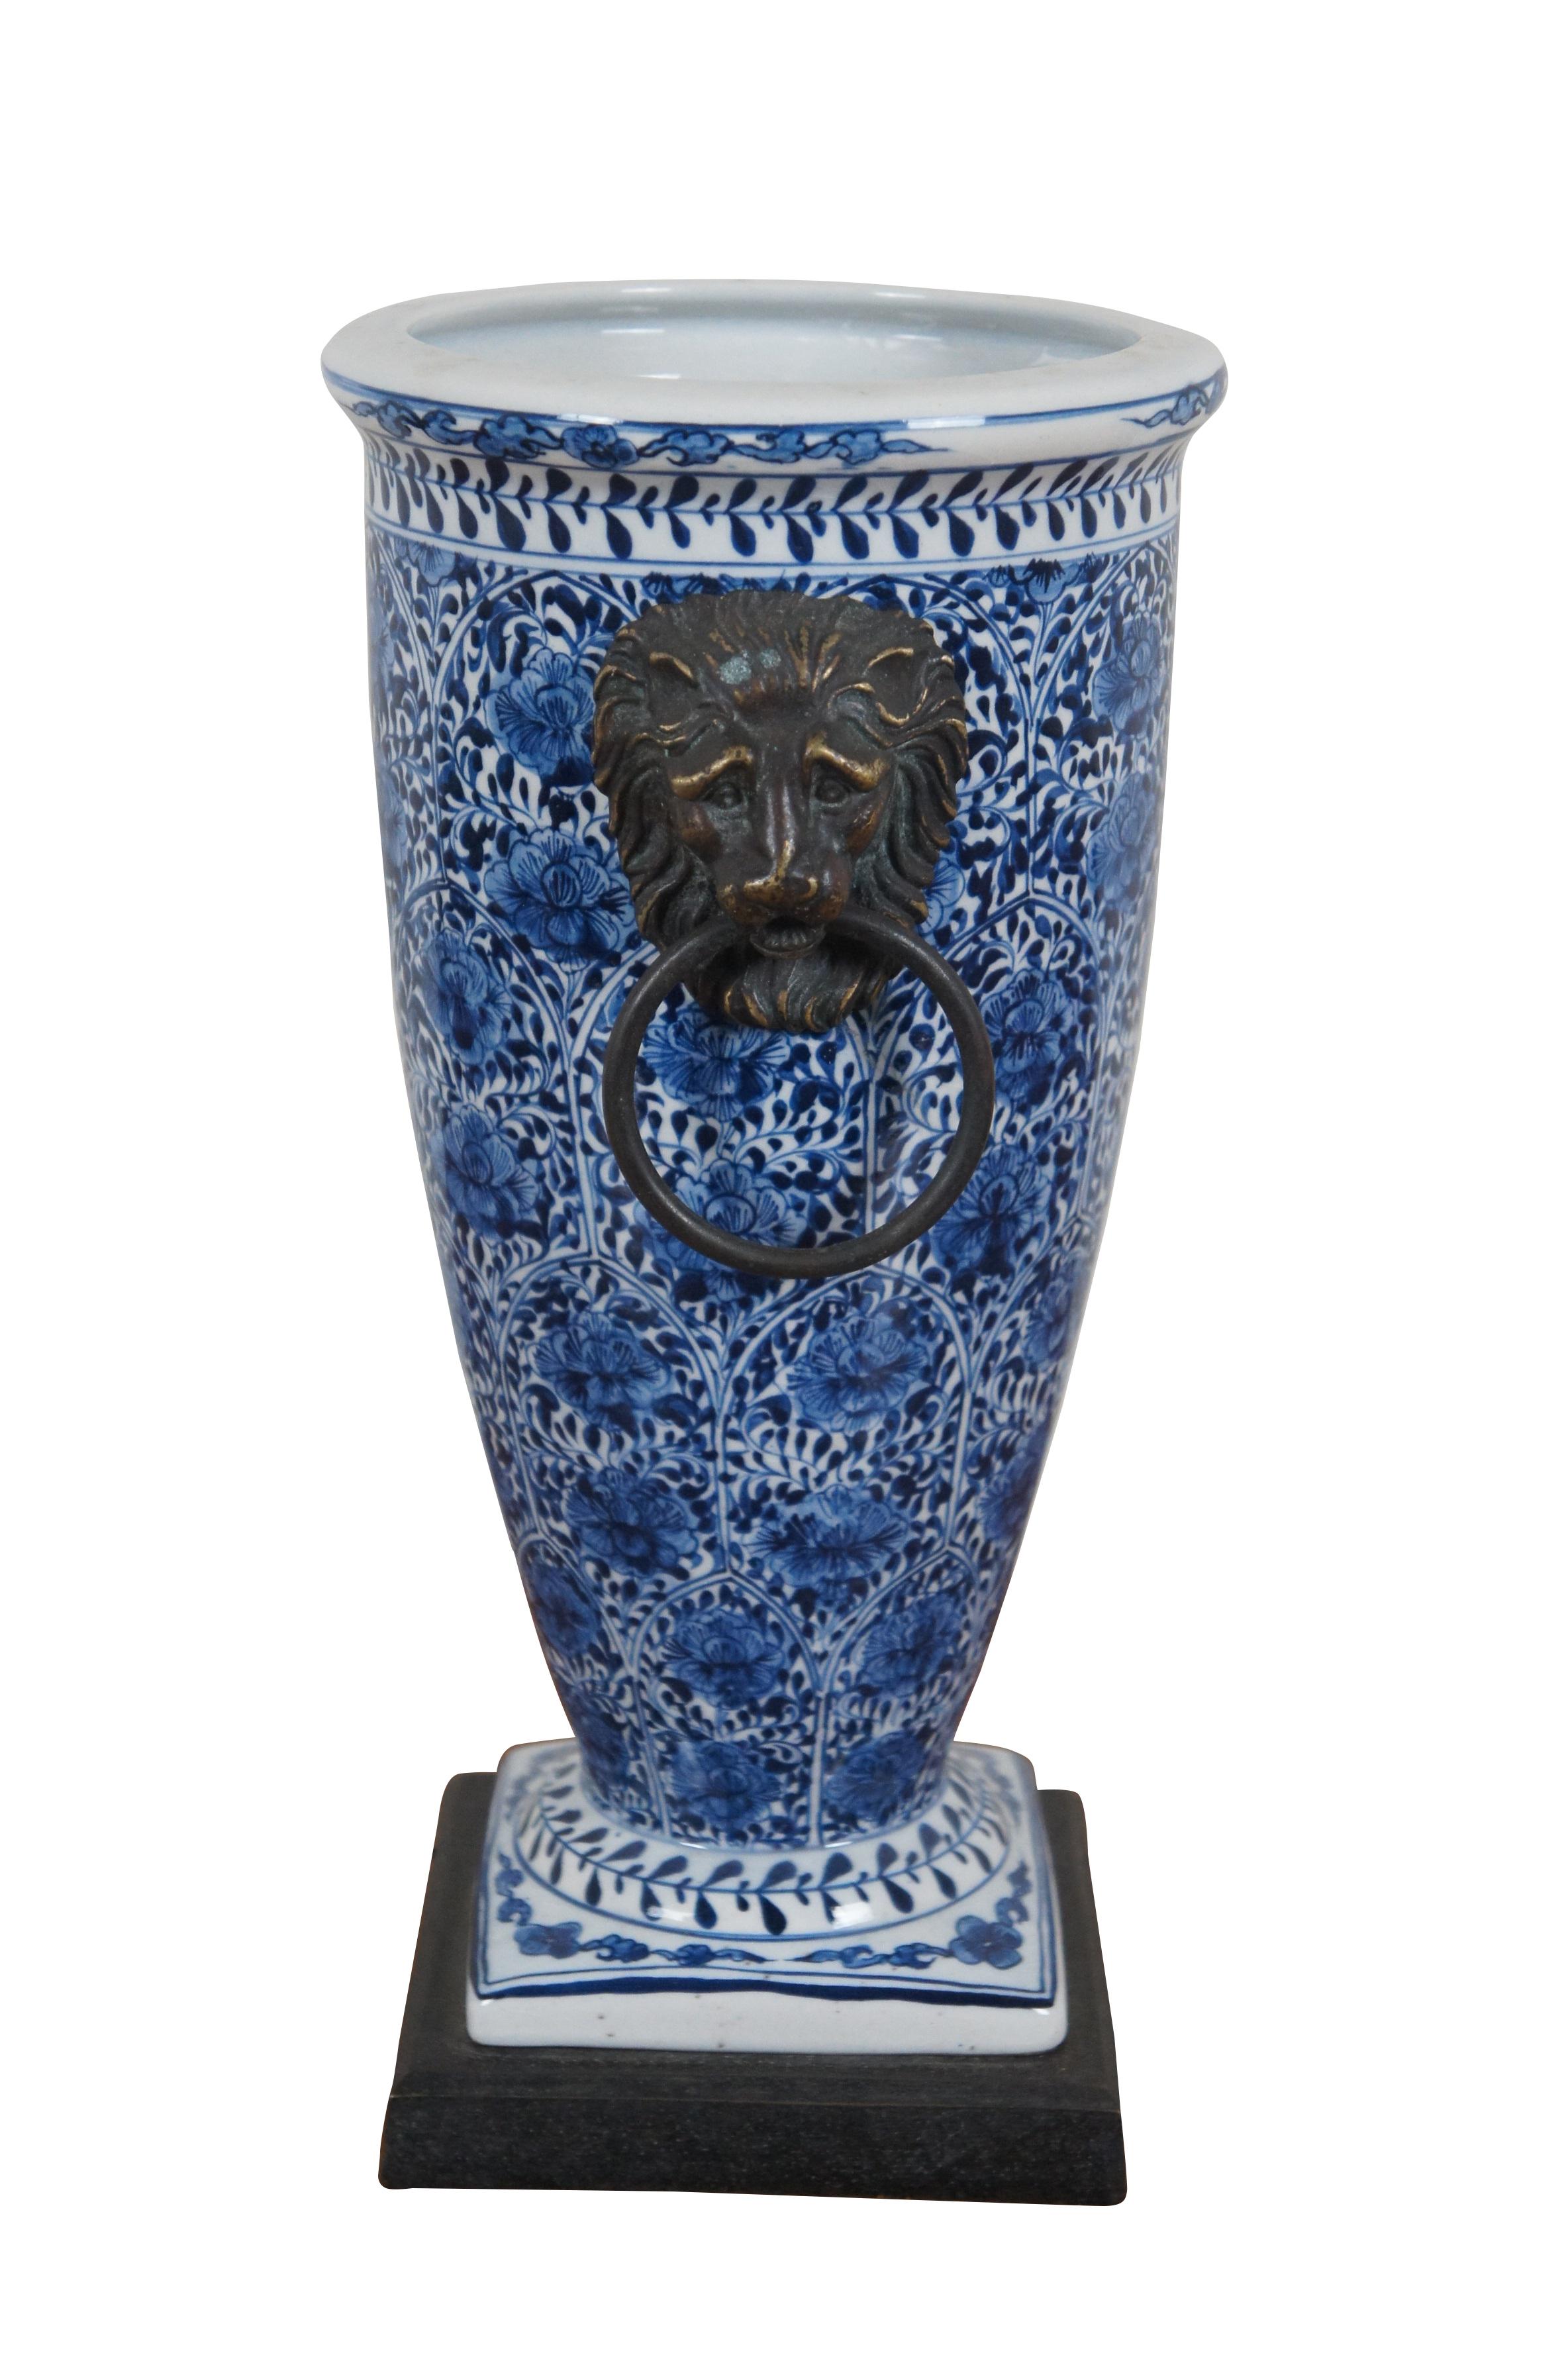 Vintage blue and white lotus flower porcelain vase with metal plinth base and  lion's head holding ring handles. Attributed to Theodore Alexander.

Dimensions:
7.5